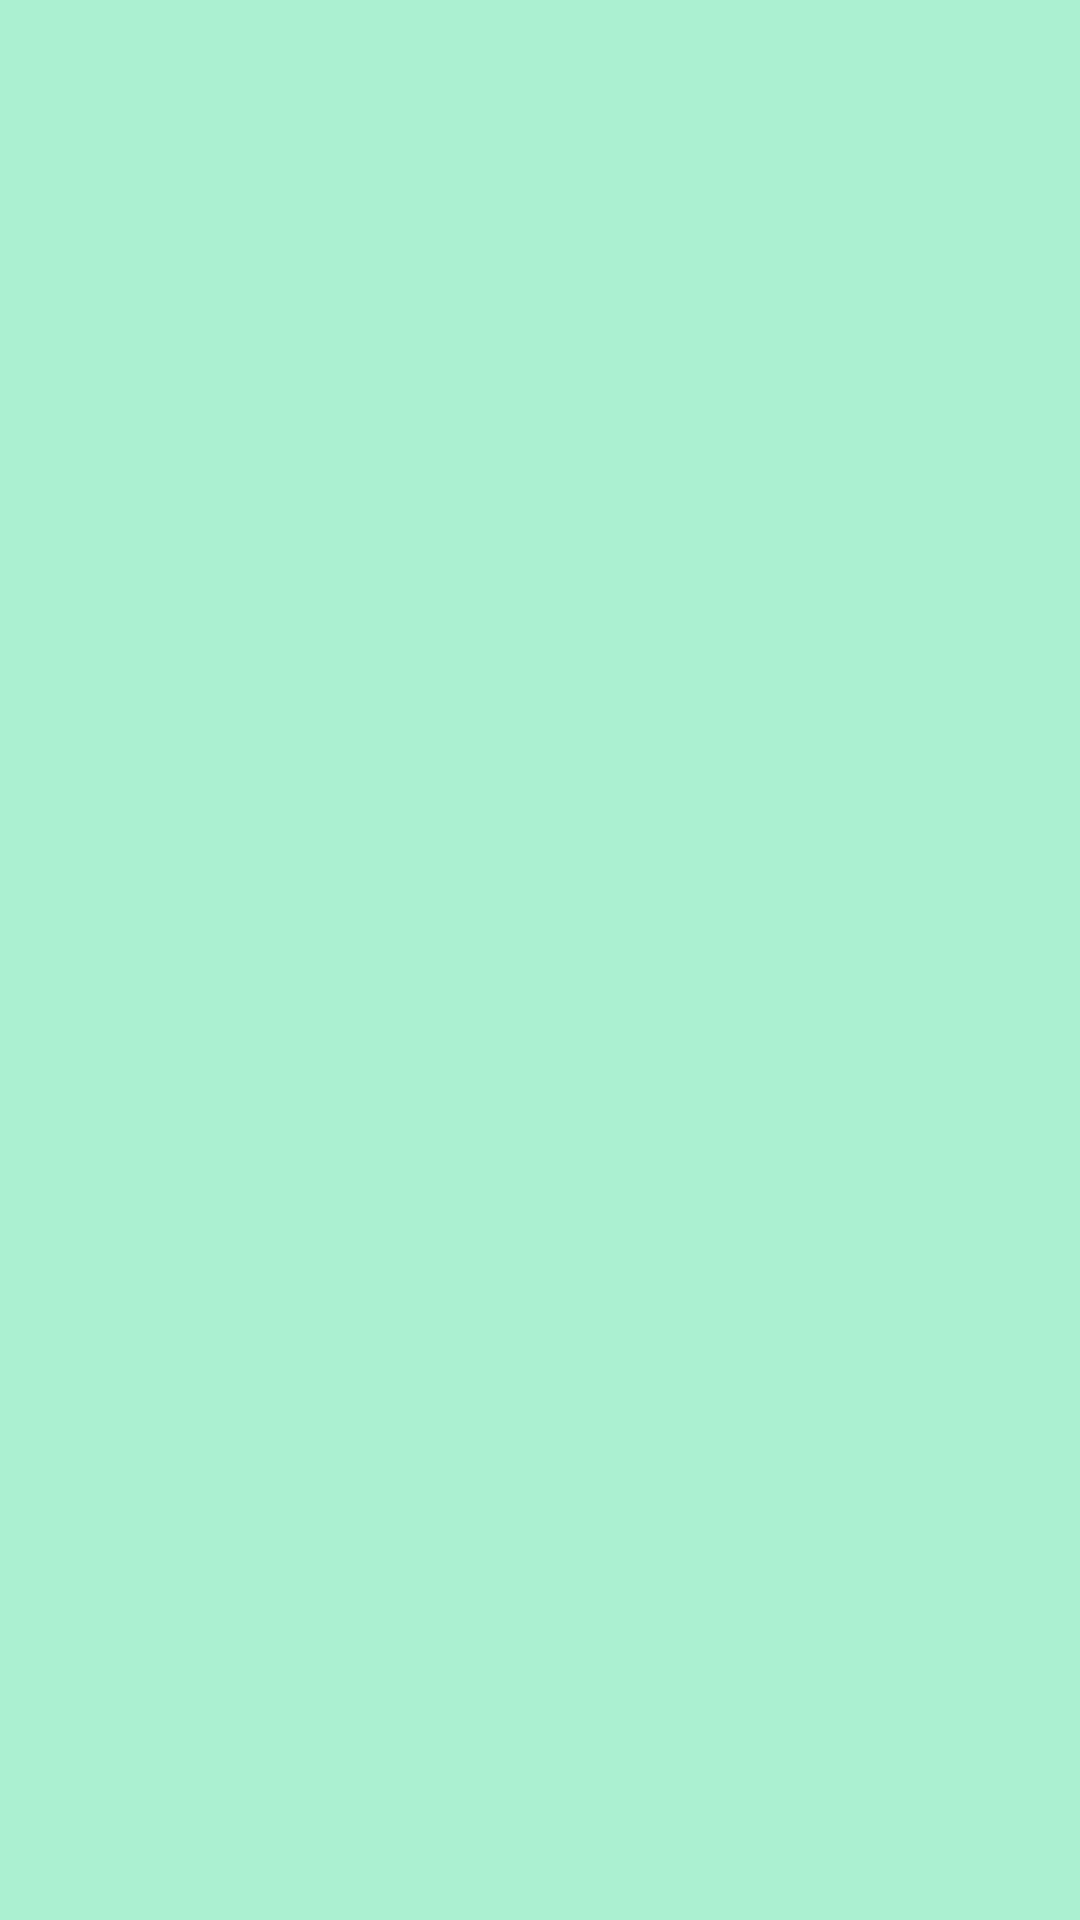 1080x1920 Magic Mint Solid Color Background